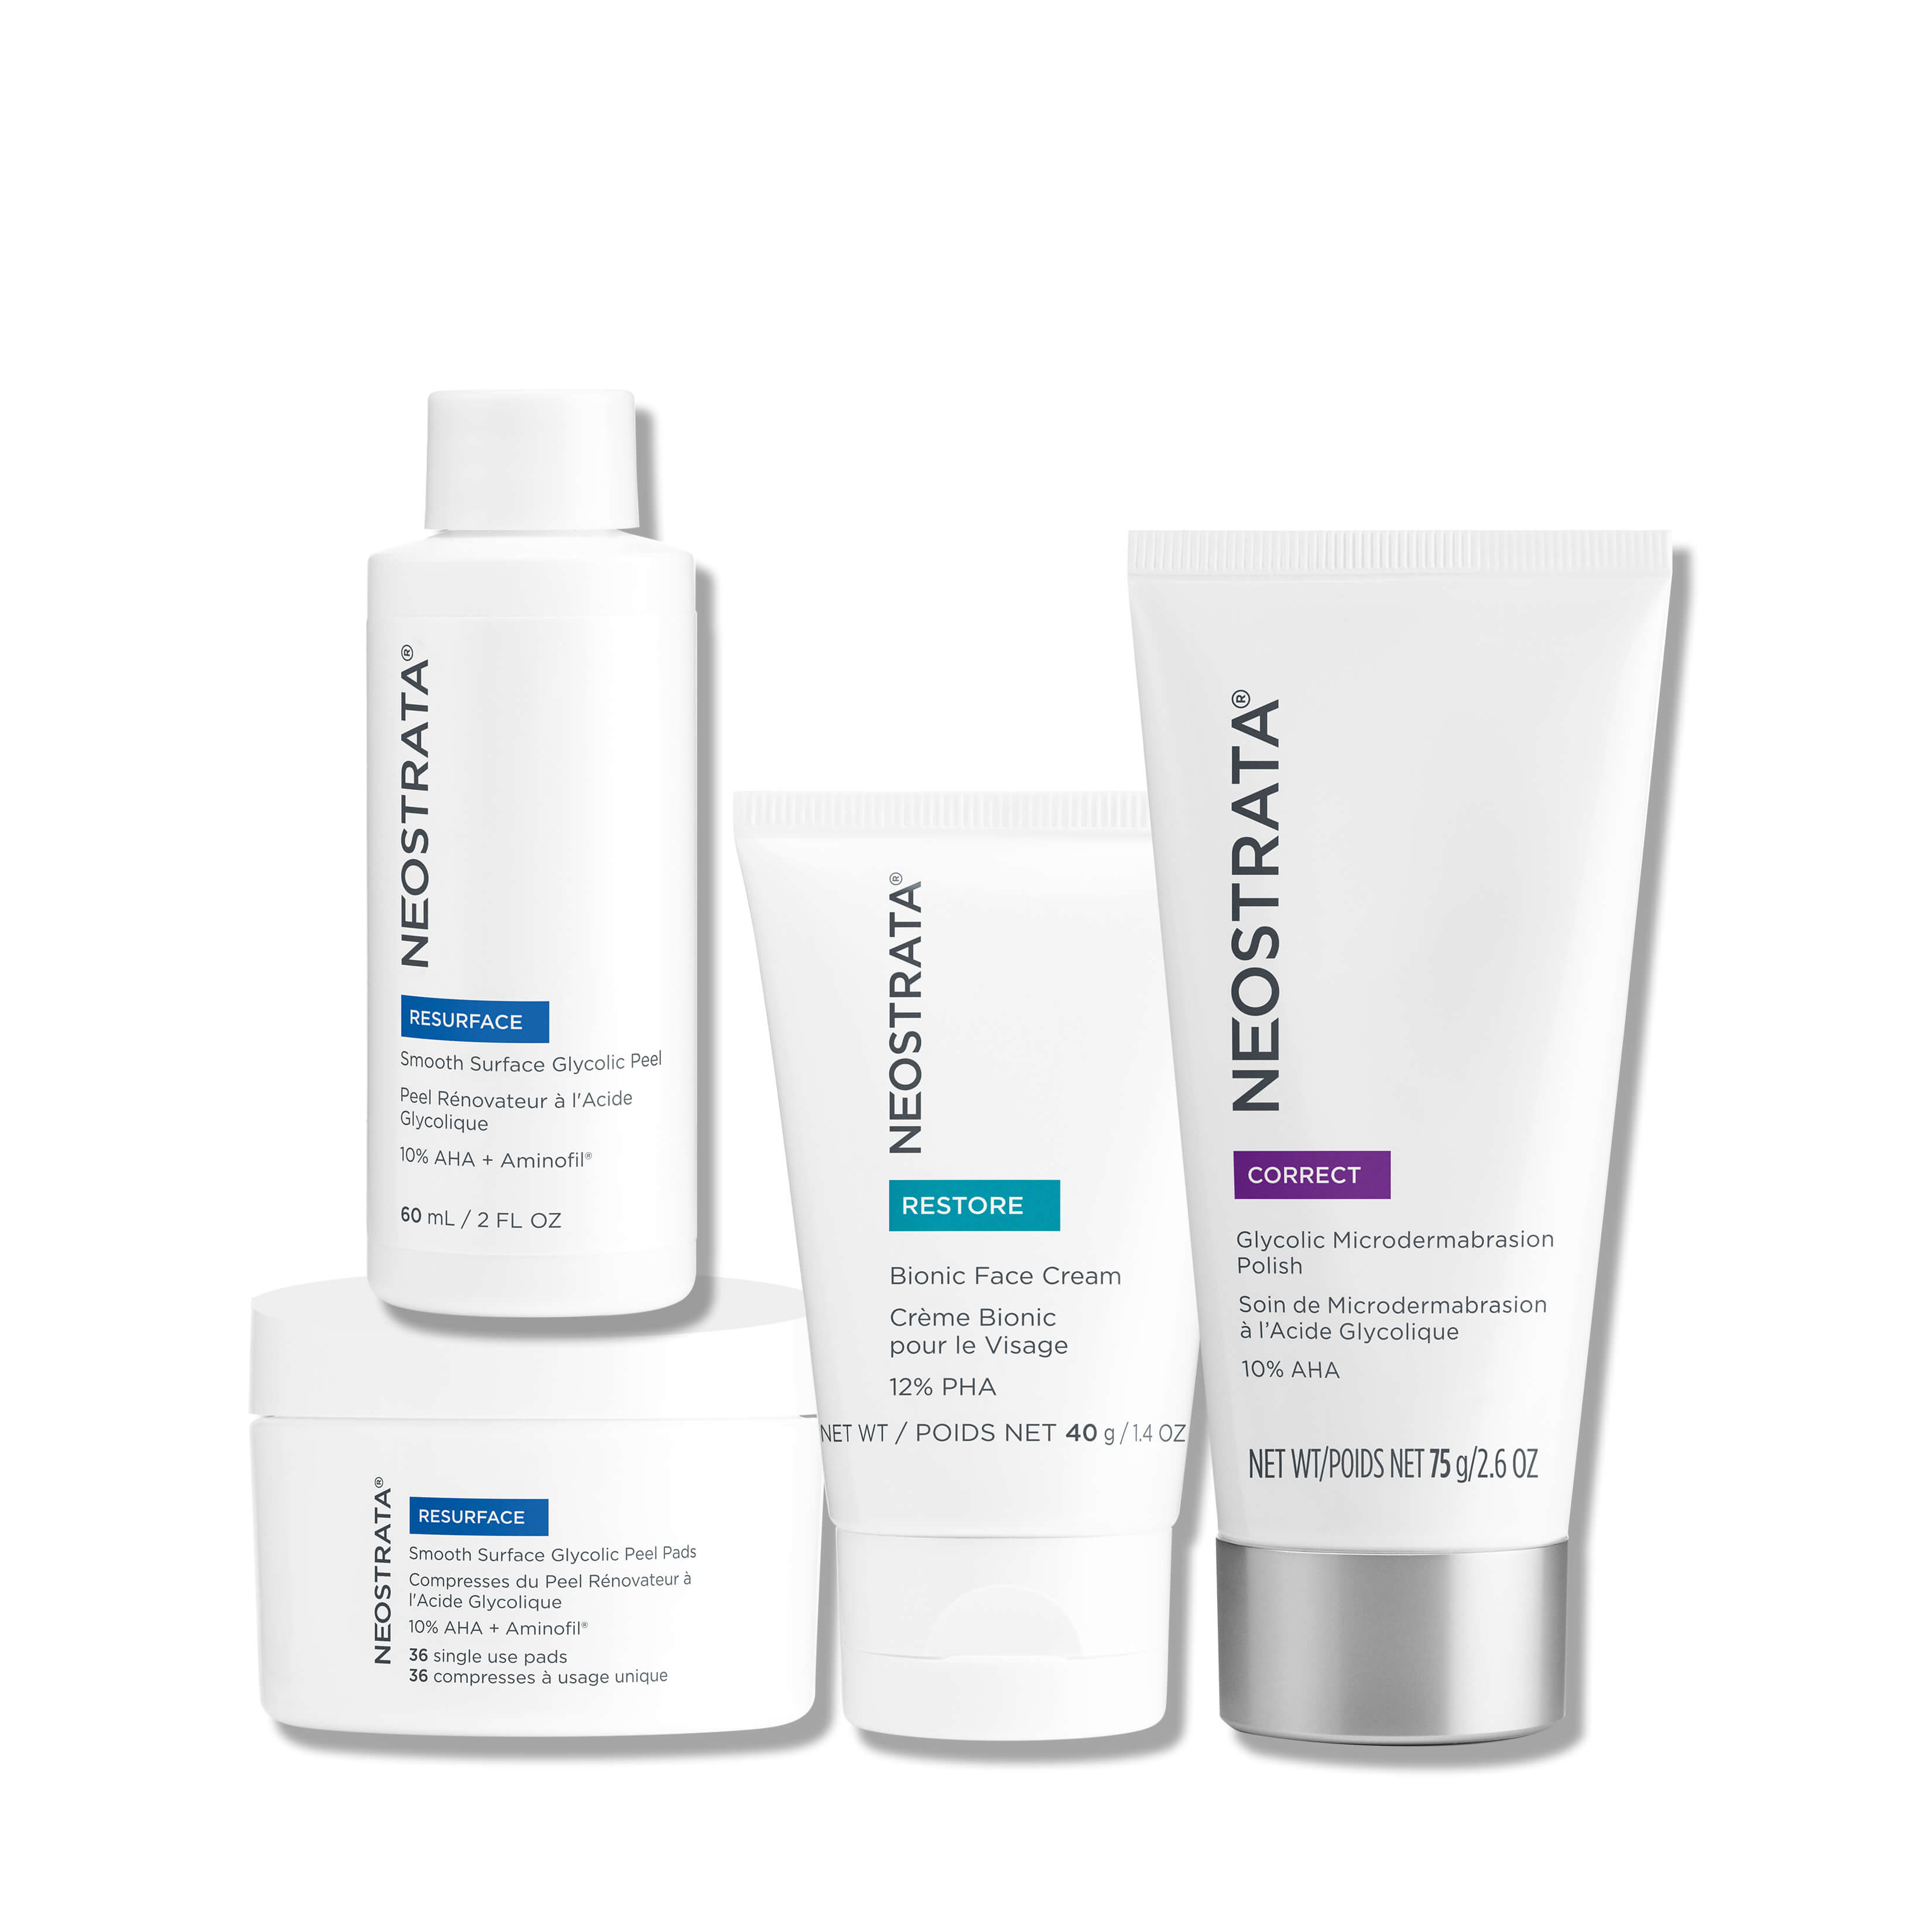 NeoStrata Peel Expert Set | Peel & Polish Your Way To Glowing Skin With This High-Performance Set Packed With A Glycolic Acid Peel, Face Scrub, & A Si